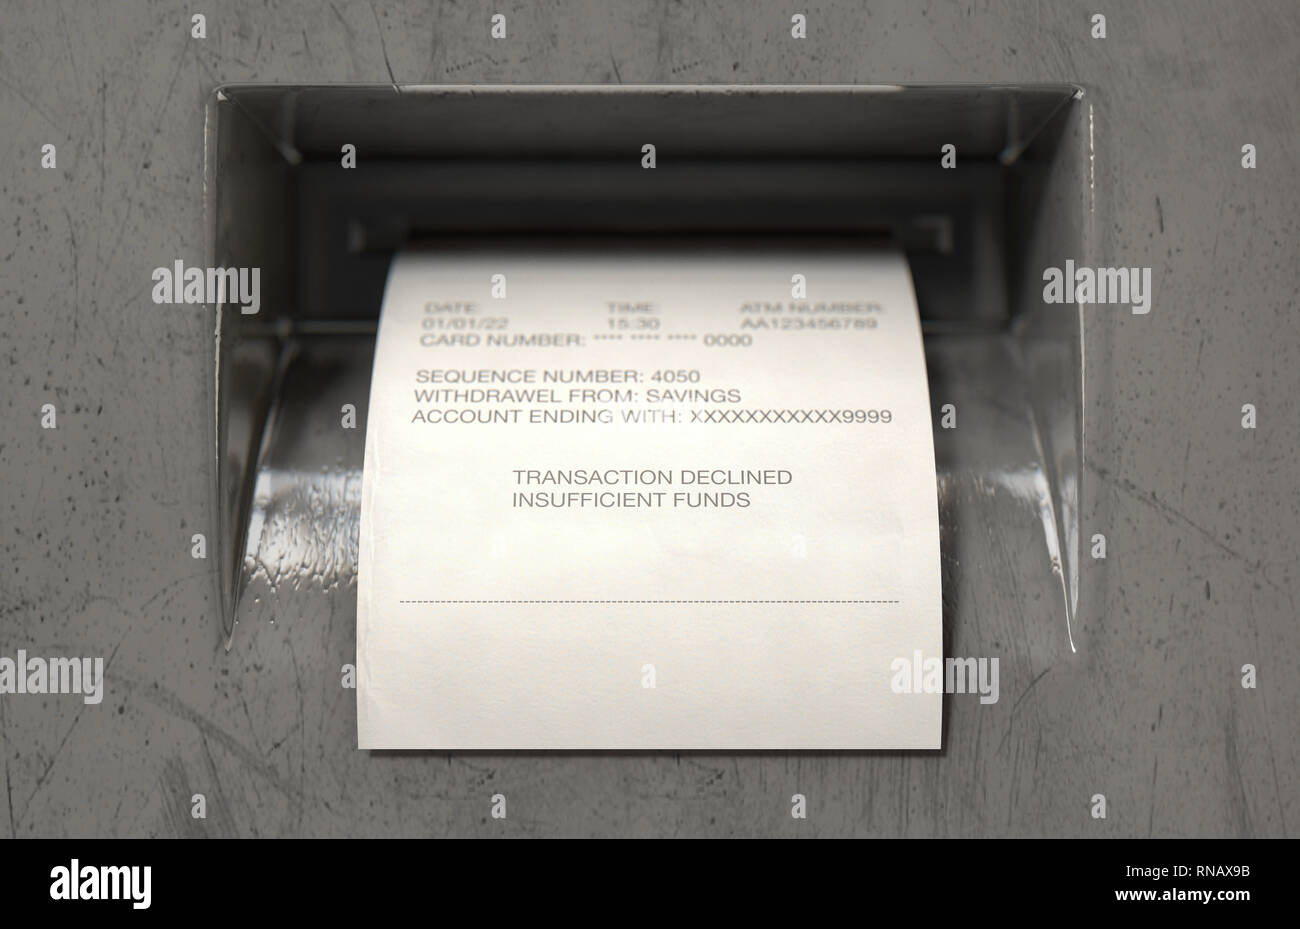 A closeup view of the slip printing section of an atm with a receipt indicating declined transaction for insufficient funds - 3D render Stock Photo